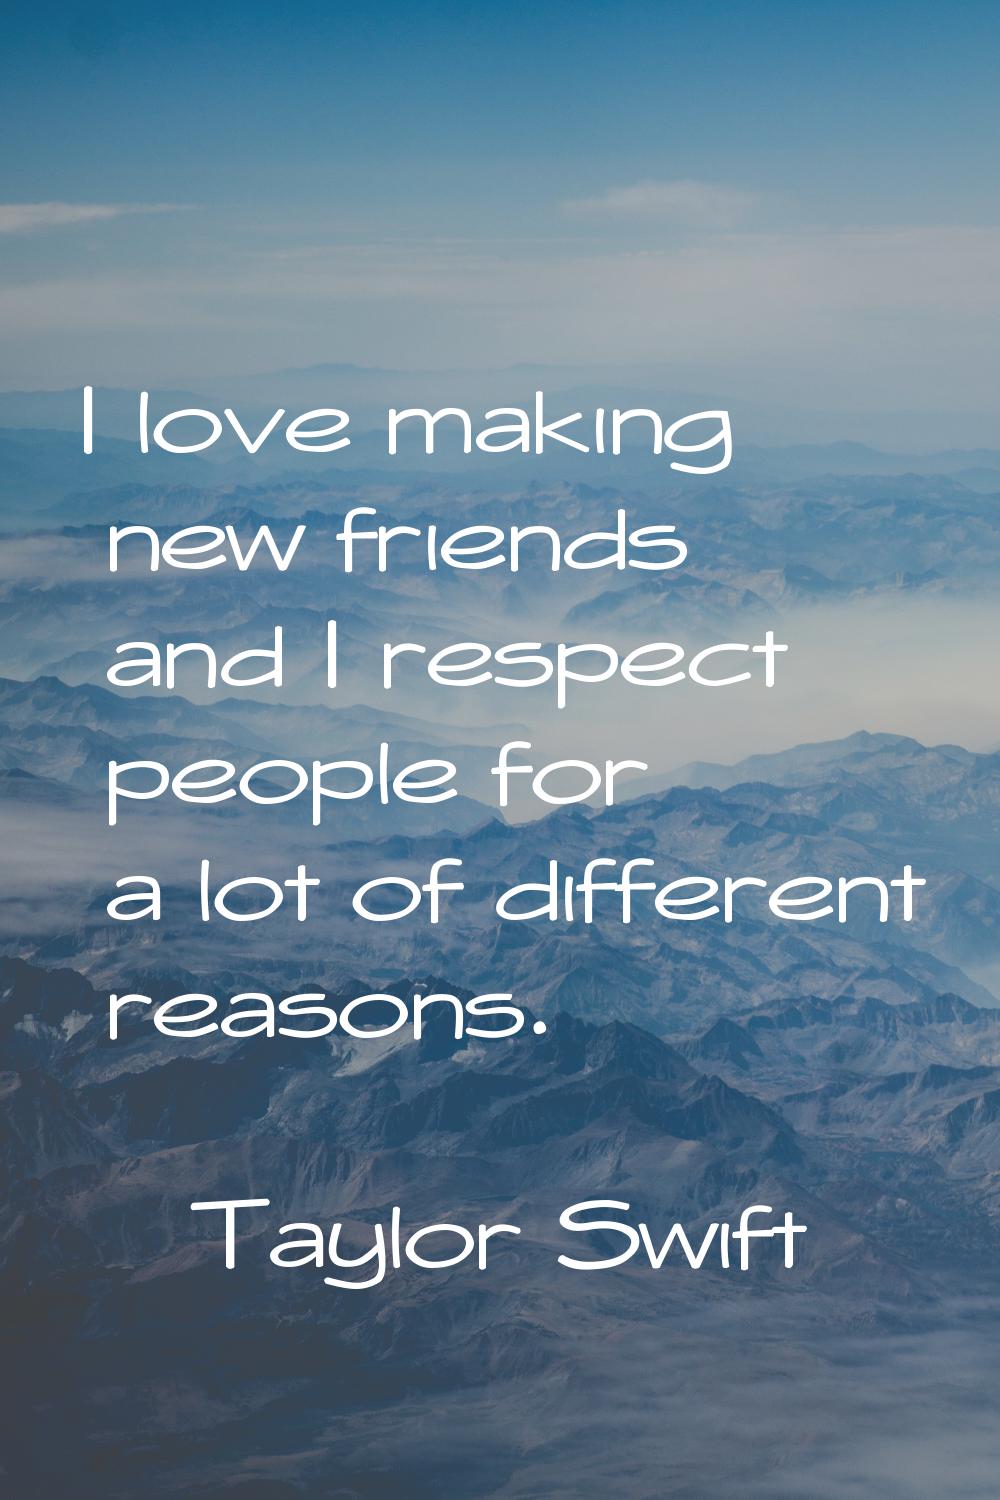 I love making new friends and I respect people for a lot of different reasons.